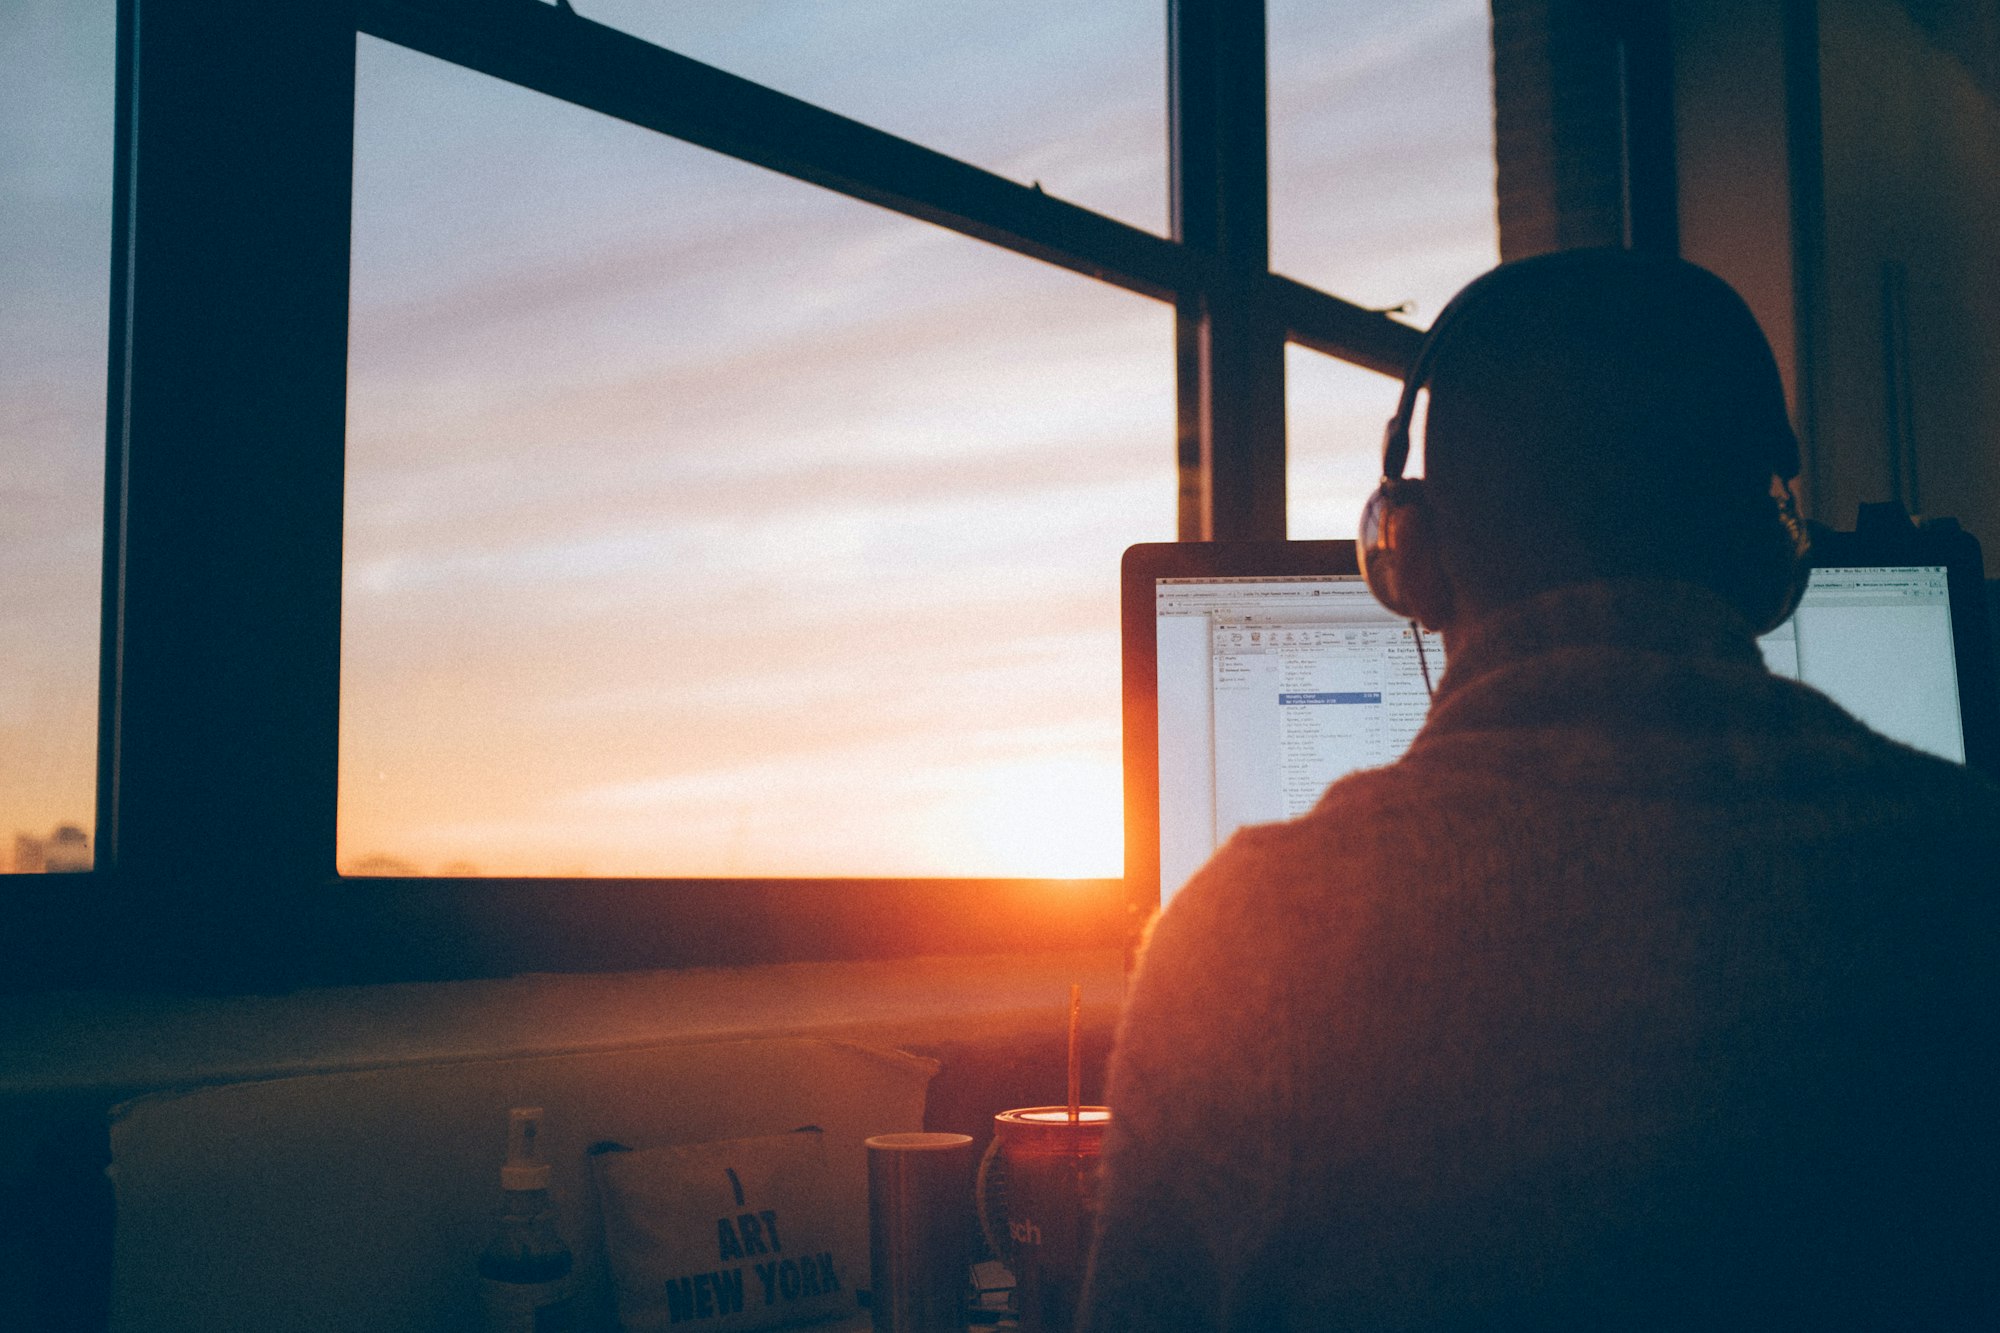 An image of a person working at his computer during sunset